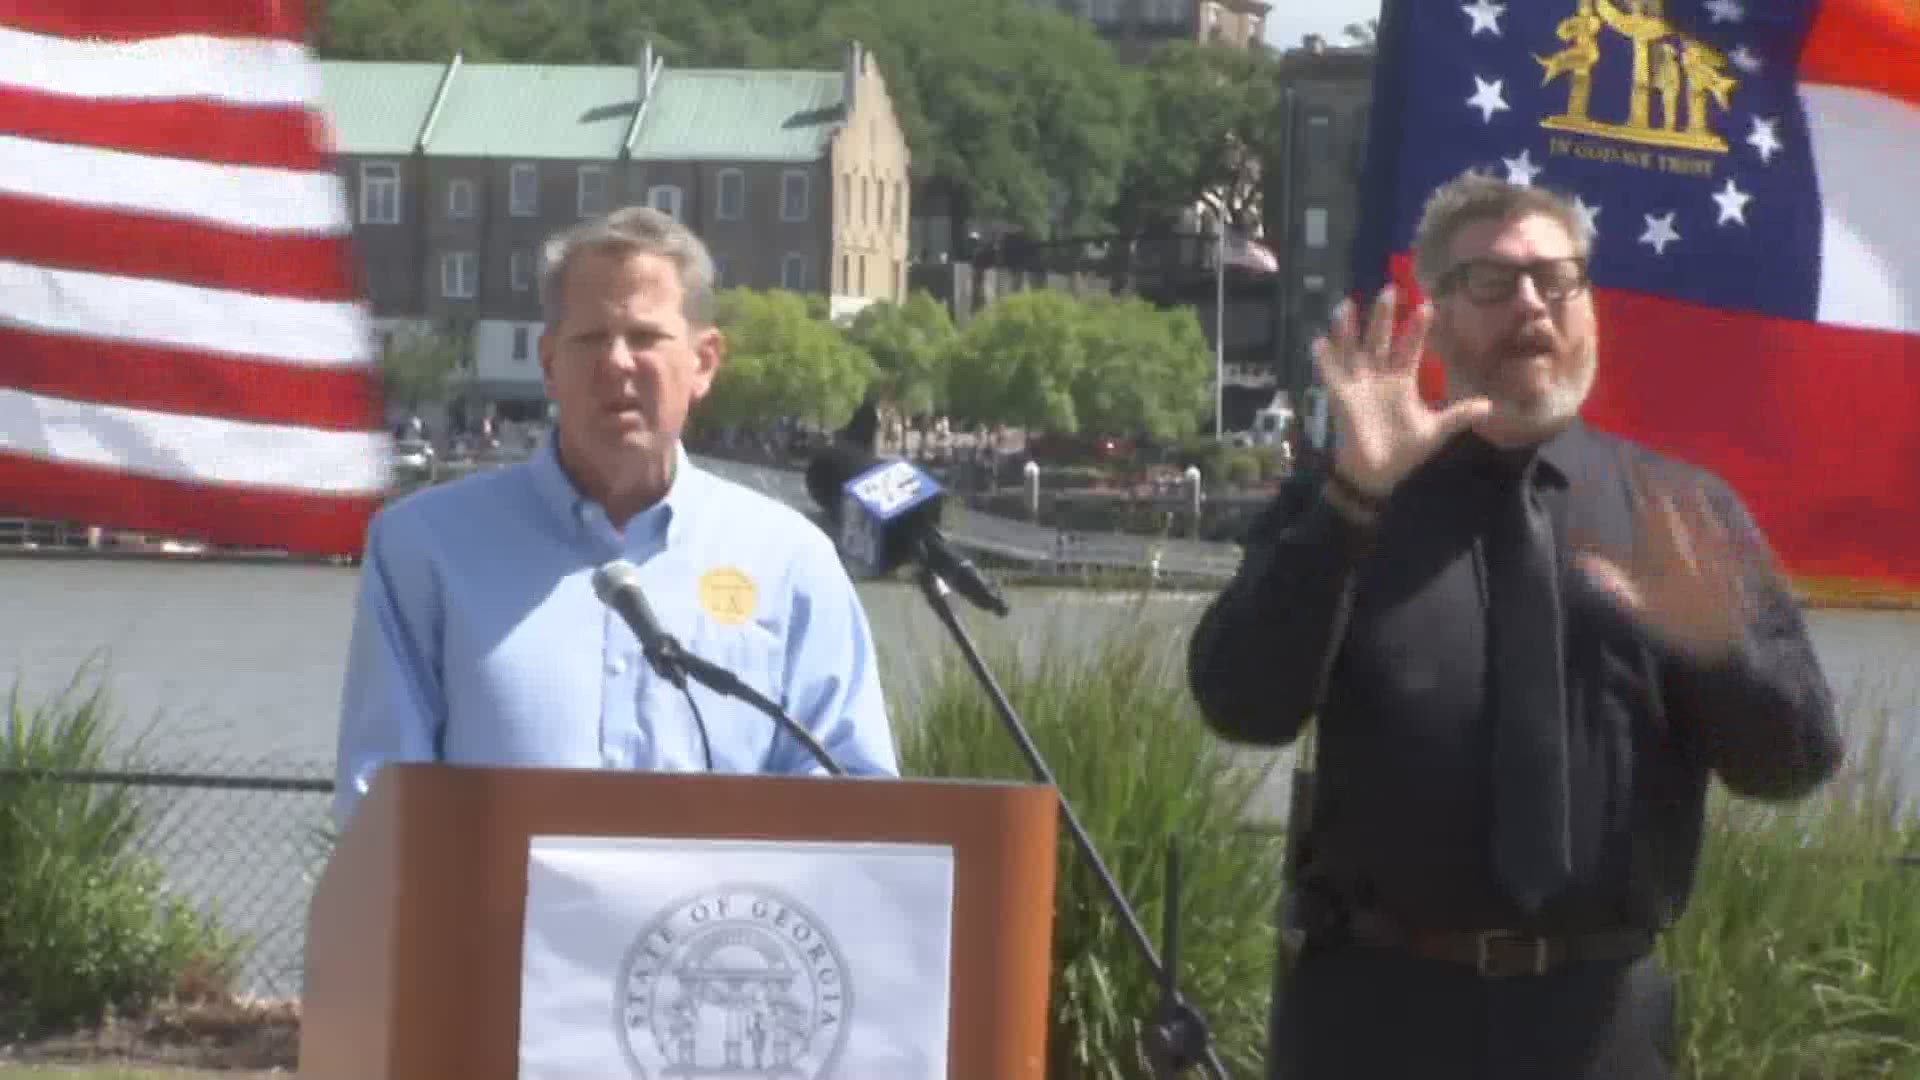 Georgia Gov. Brian Kemp held a press conference Friday at 4 p.m. in Savannah in response to the lawsuit.